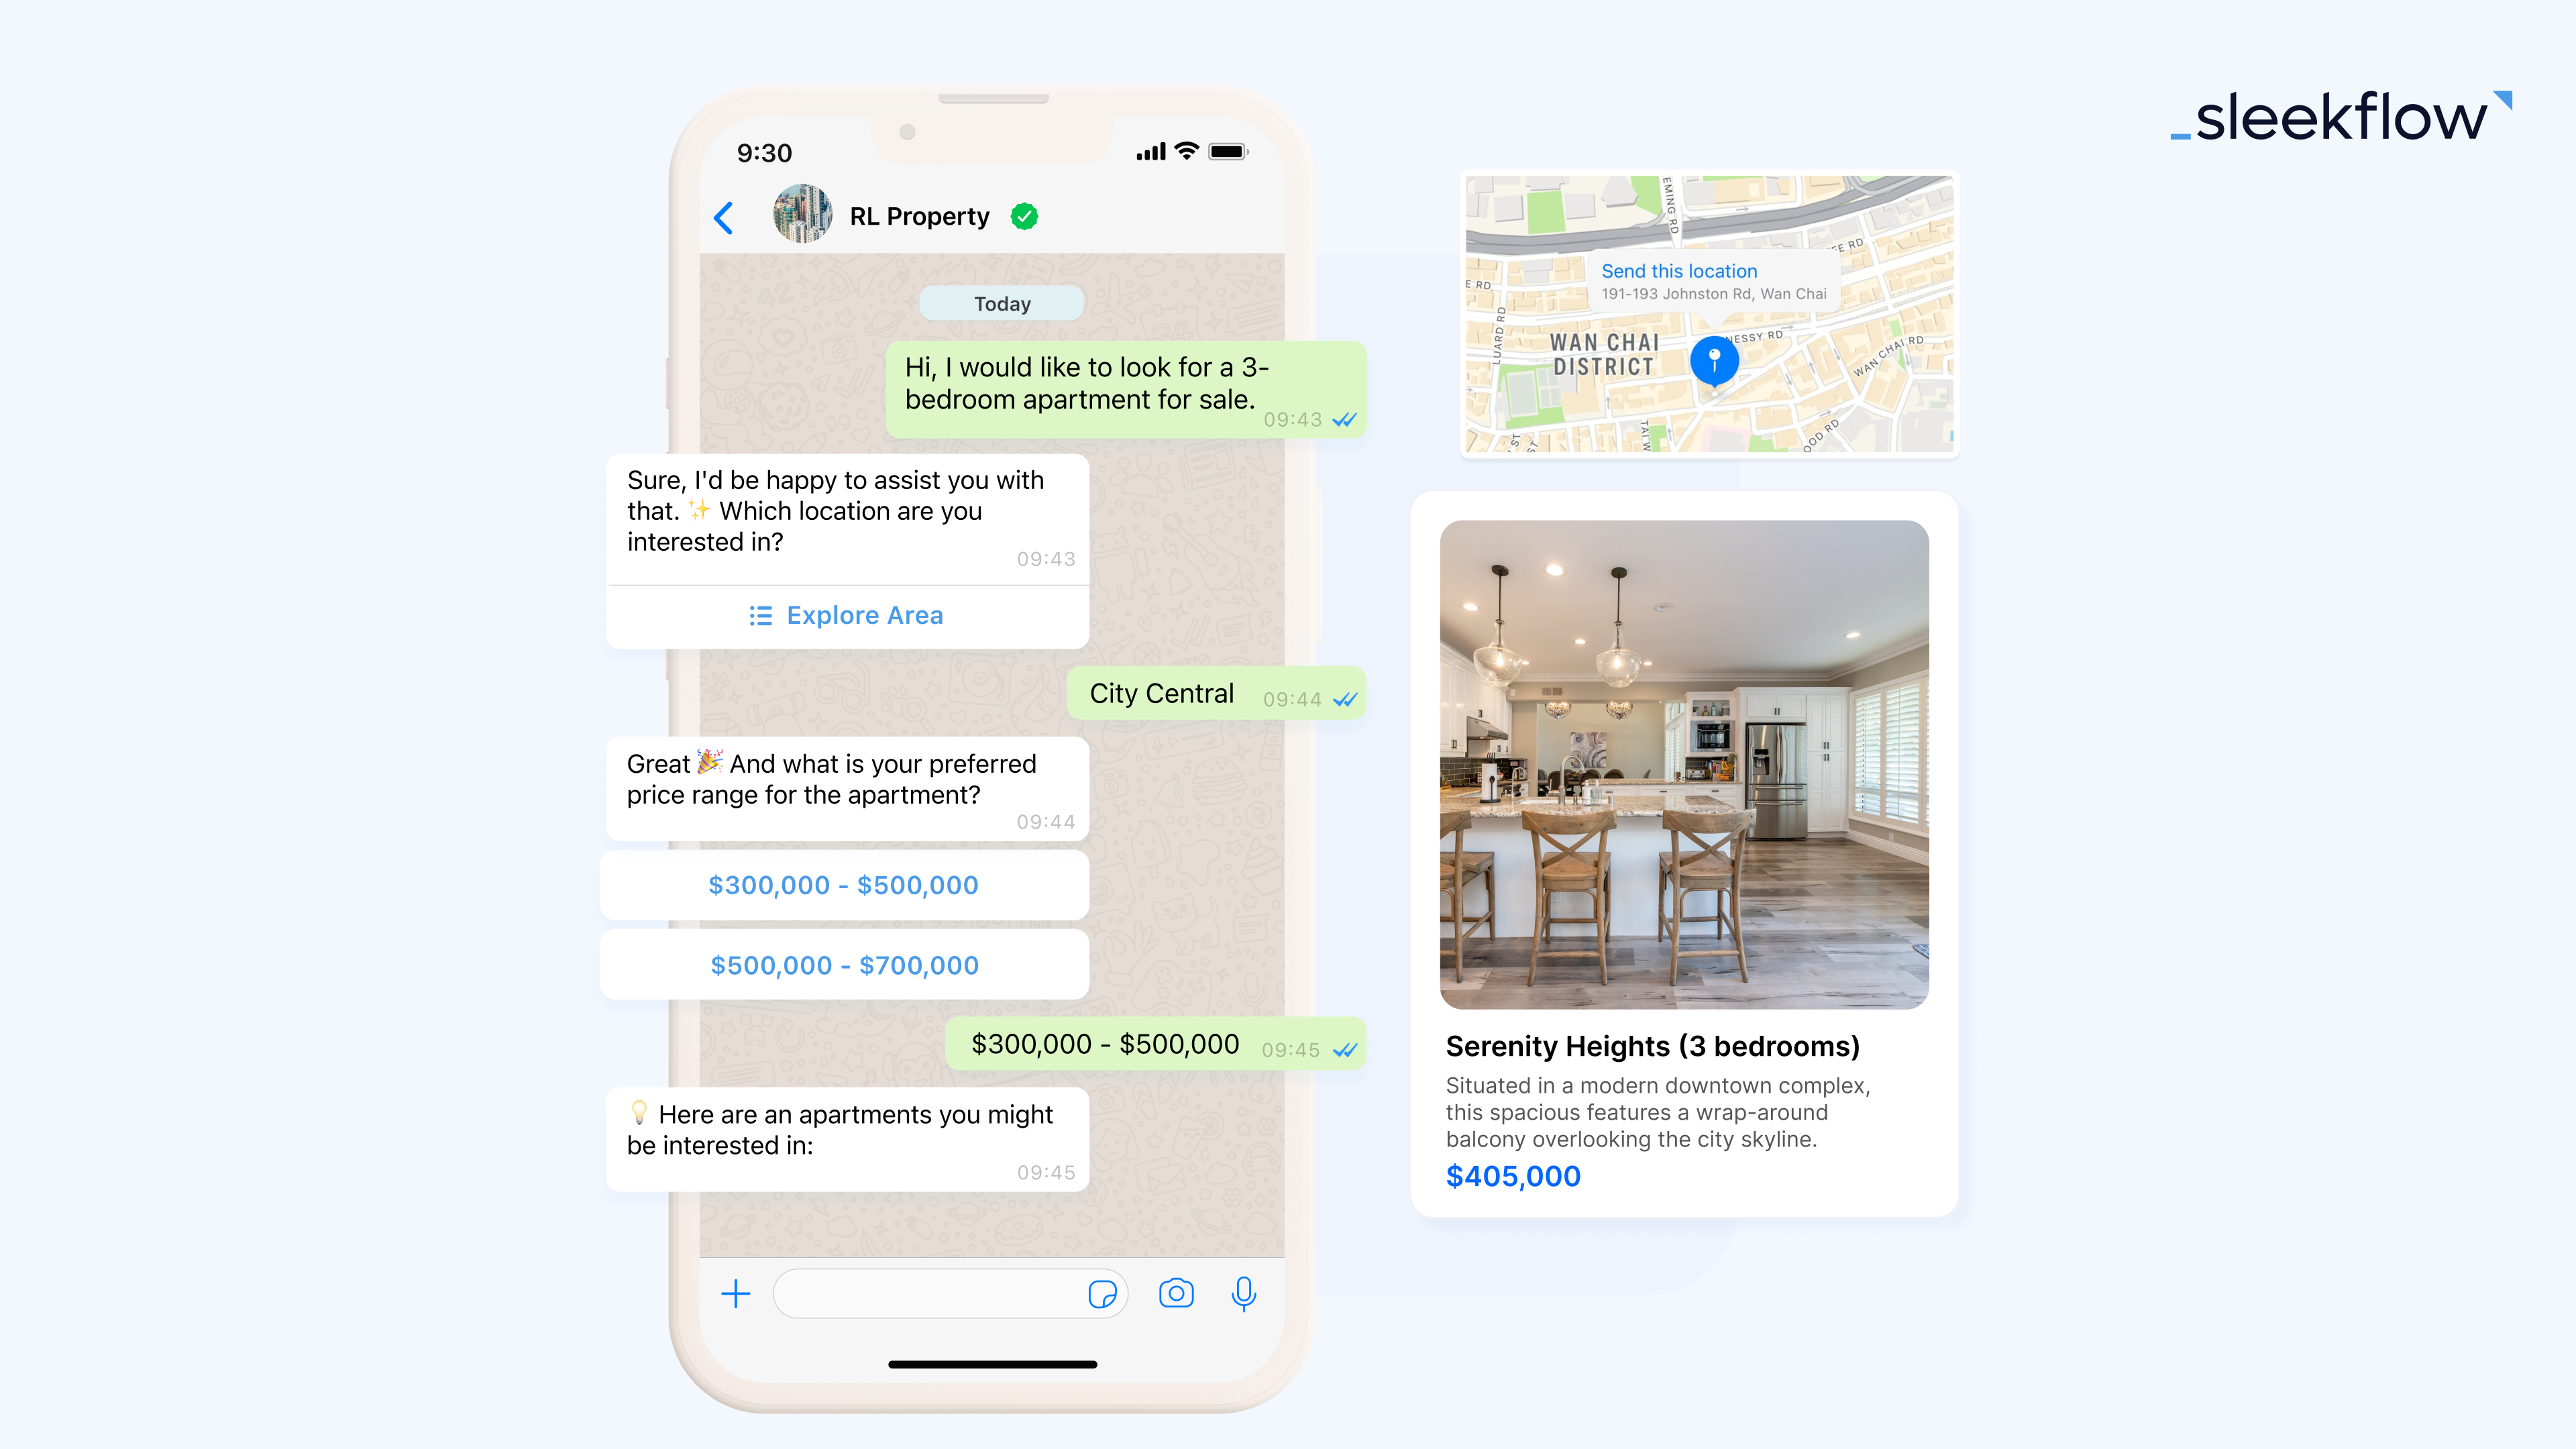 WhatsApp chat routing - chatbot to guide customers